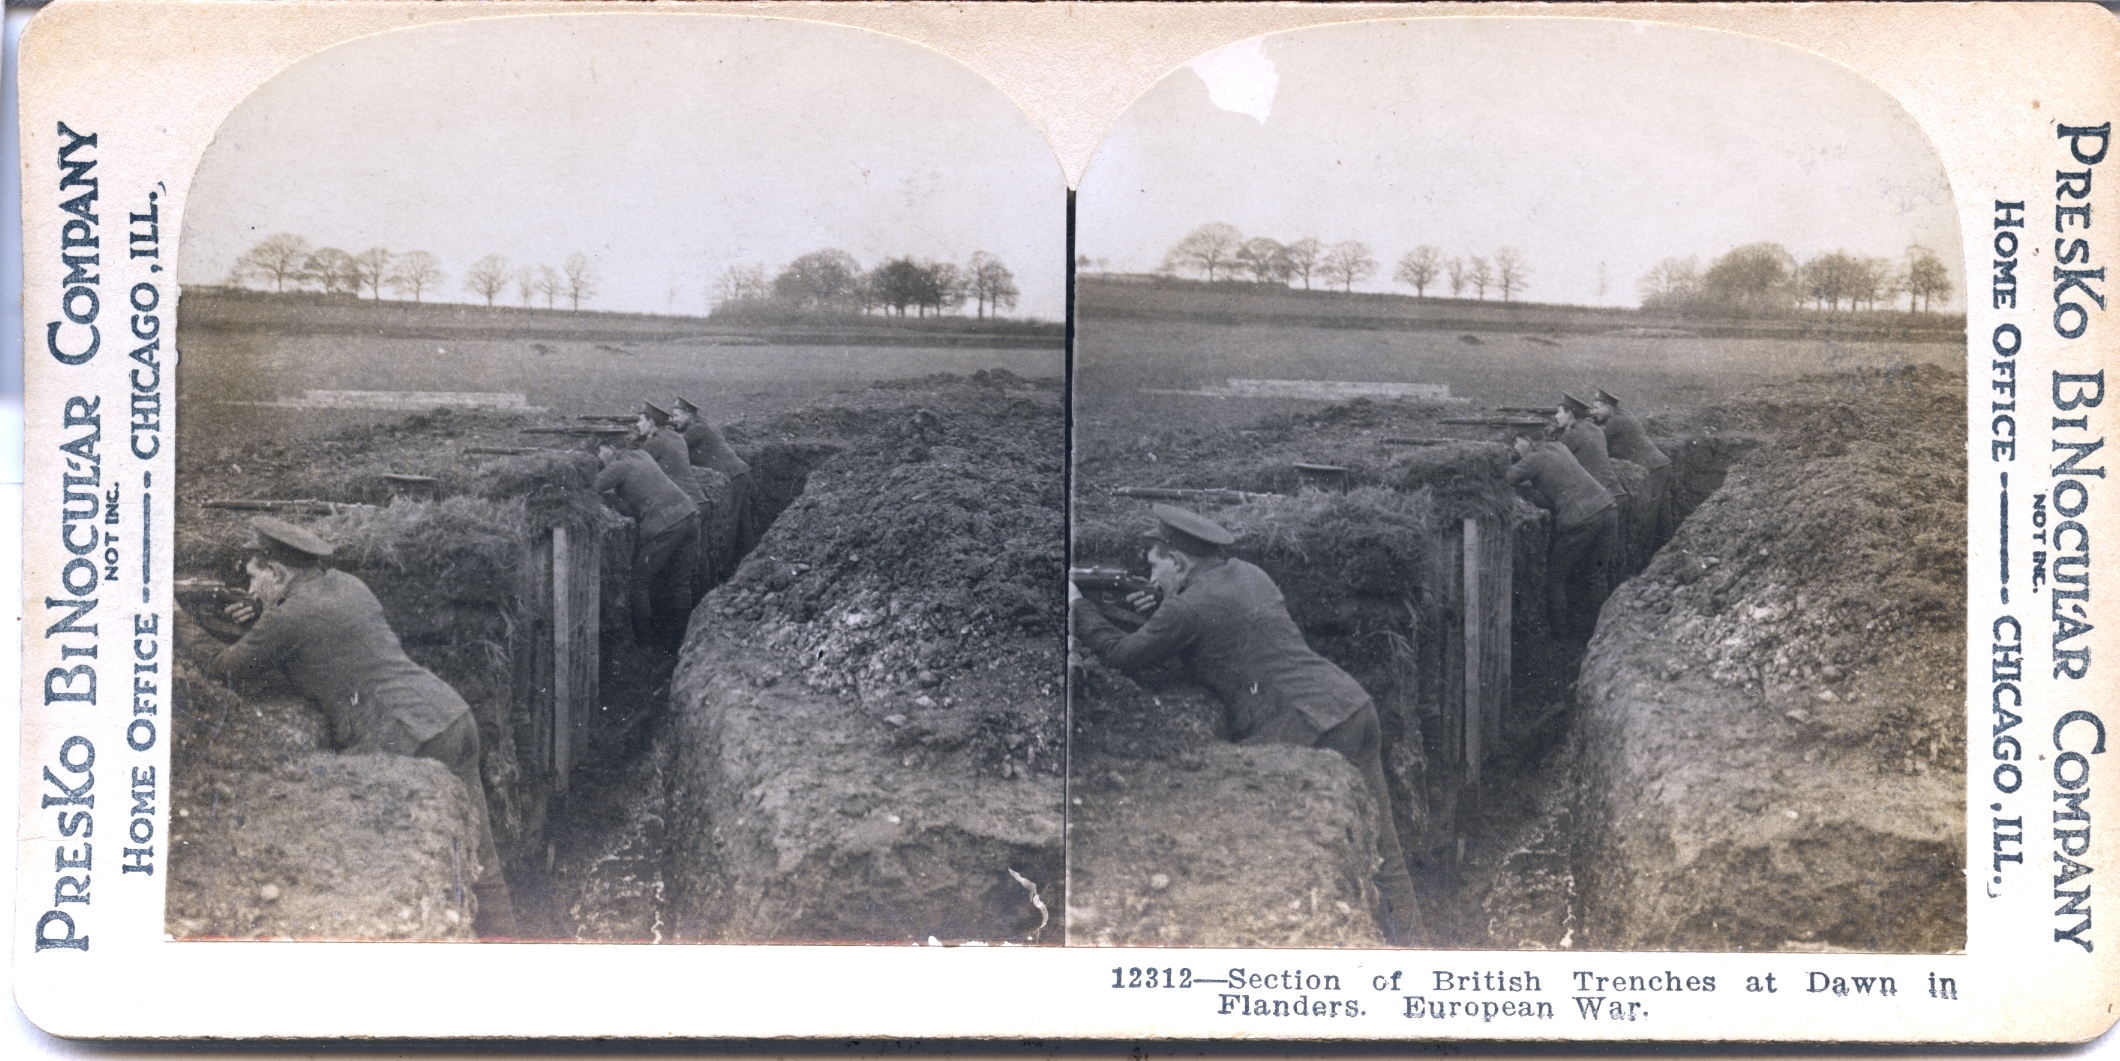 Section of British Trenches at Dawn in Flanders. European War.